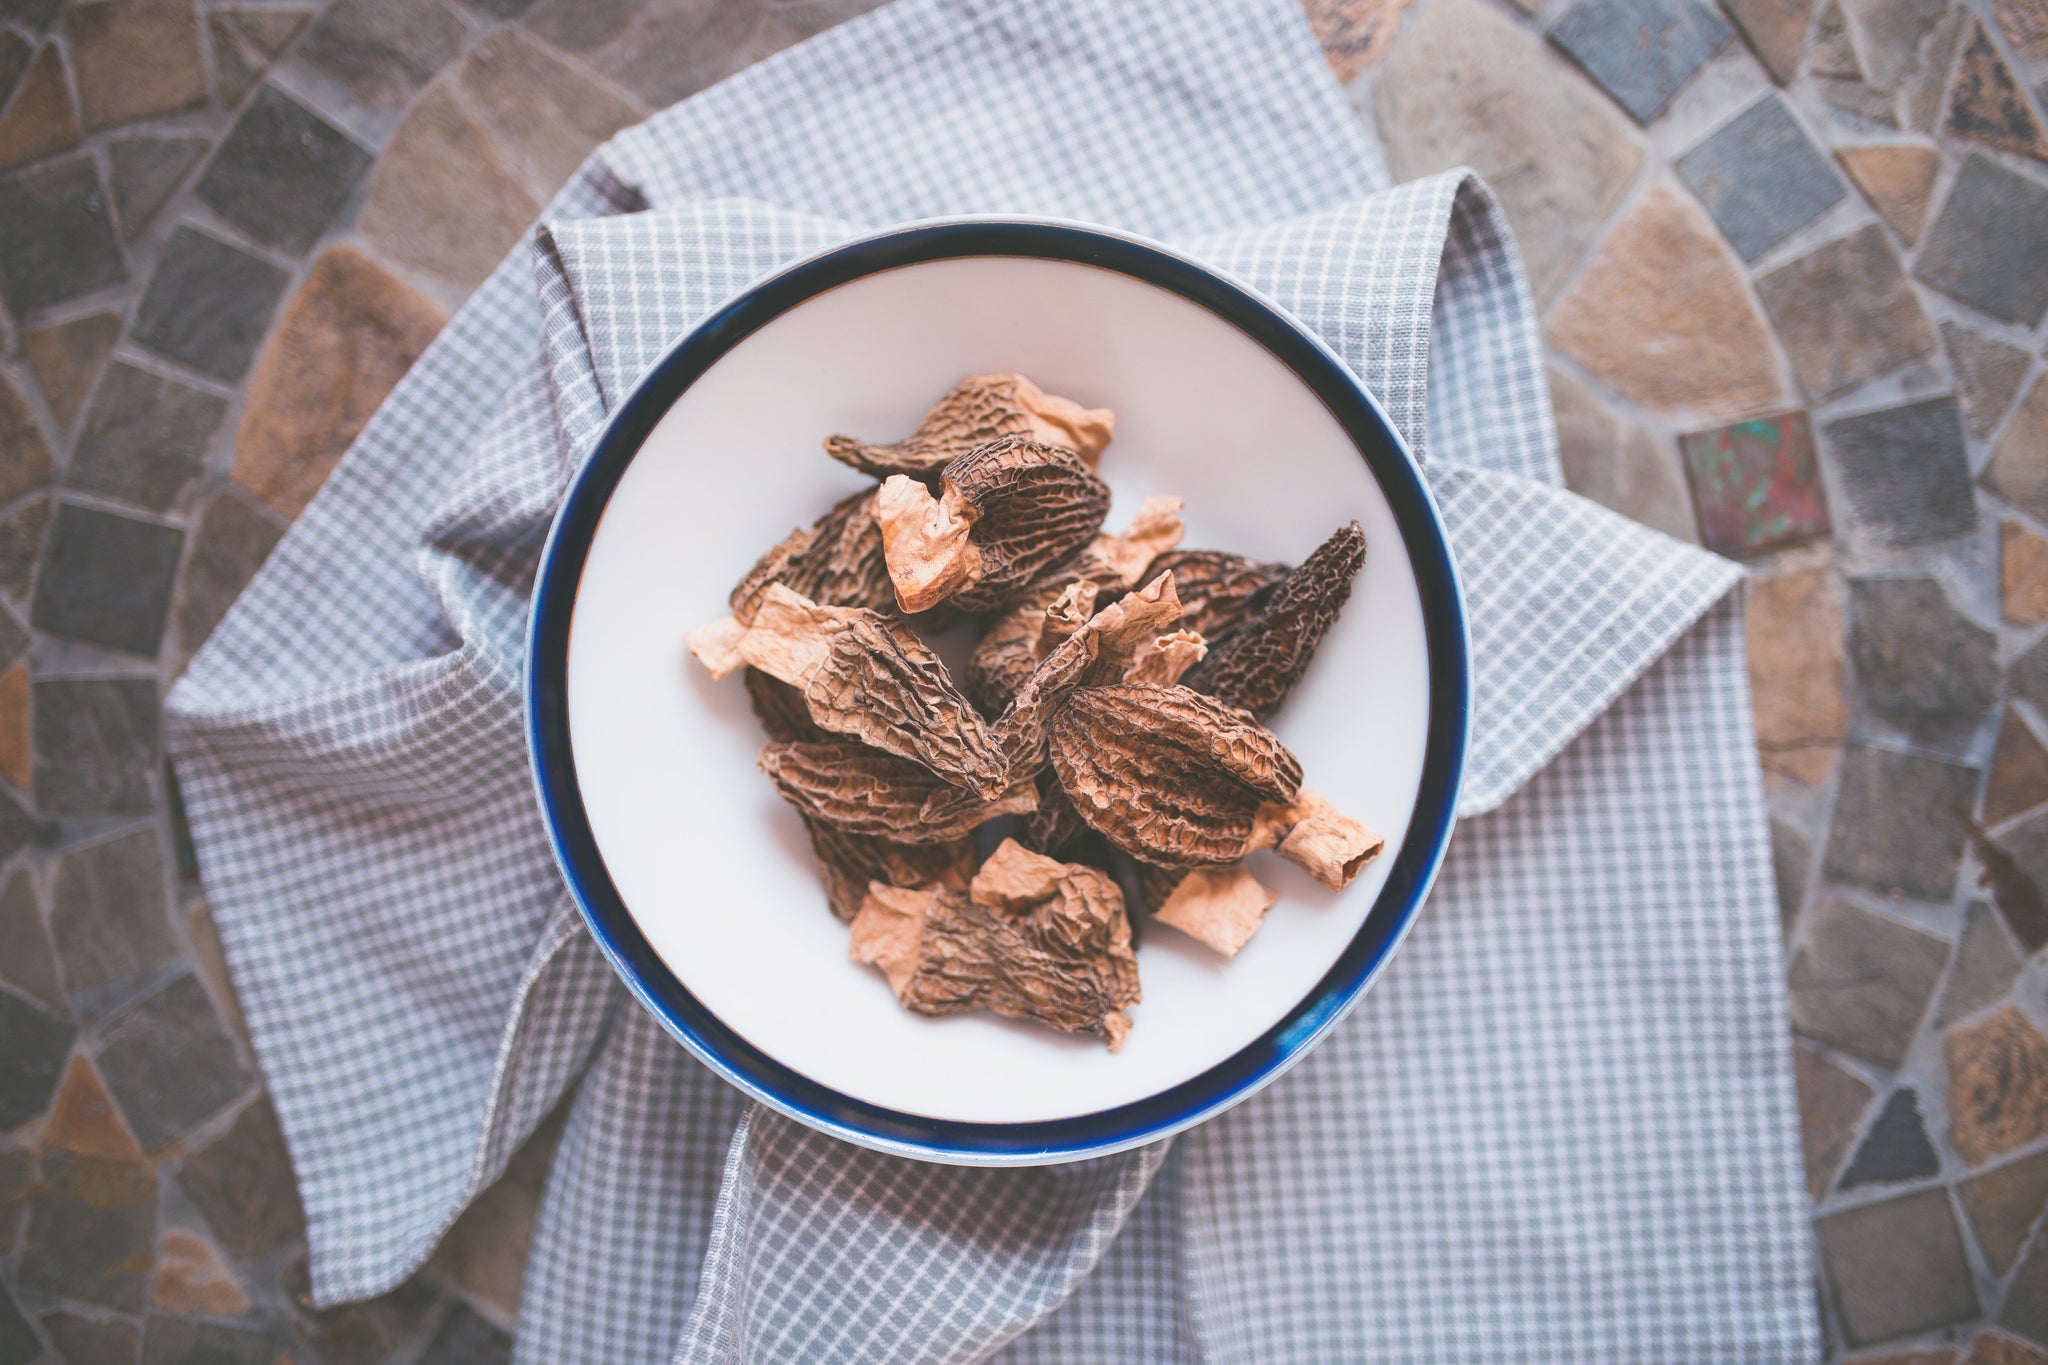 Dried Morel Mushrooms: Top Tips for Preparing and Cooking Them